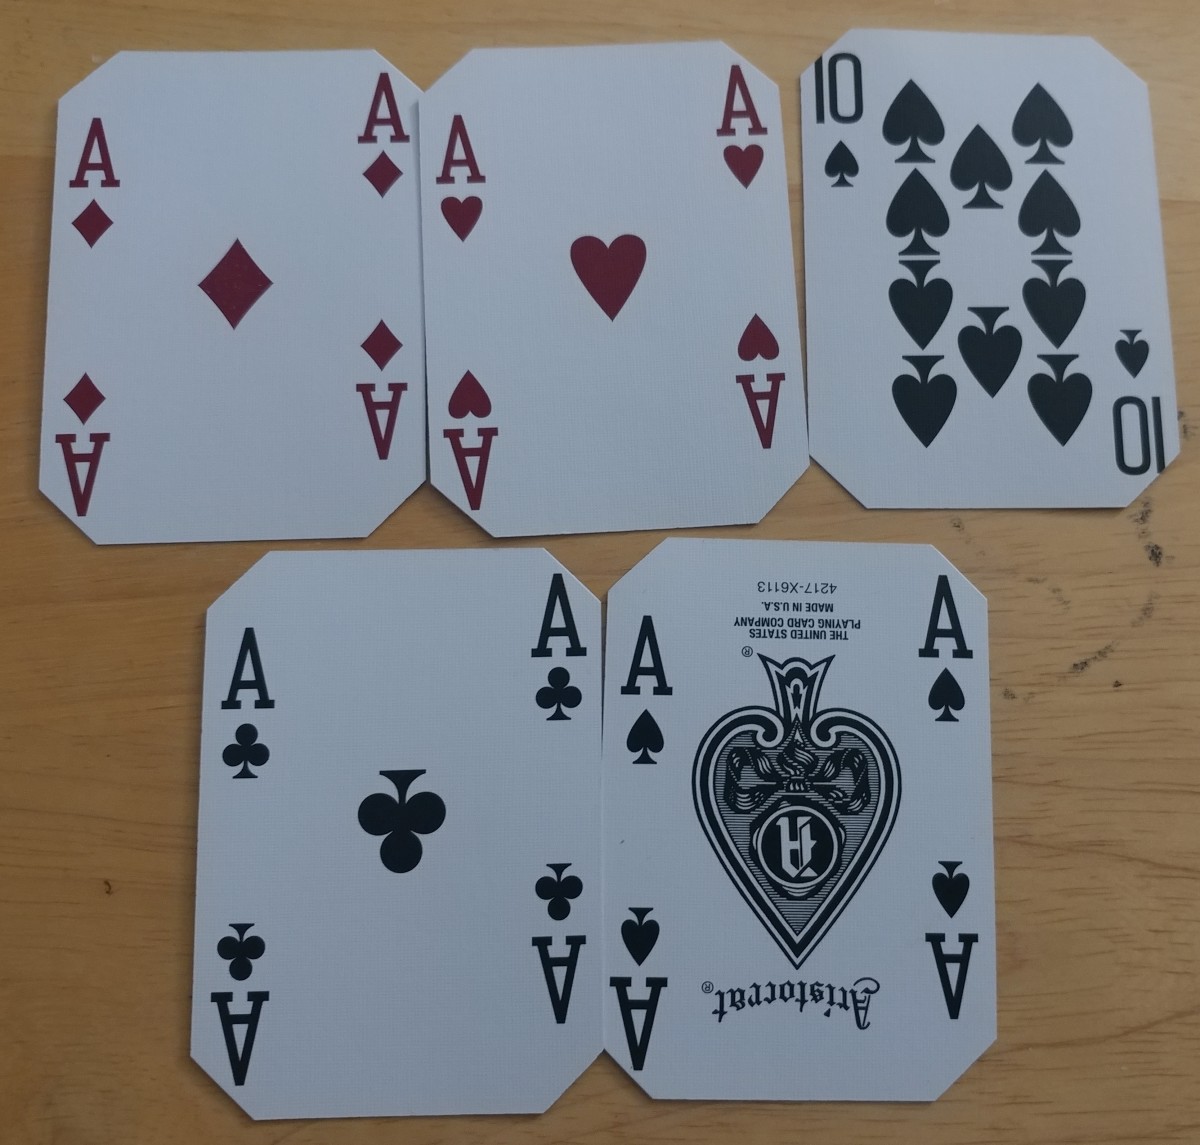 This is a four of a kind hand in poker.